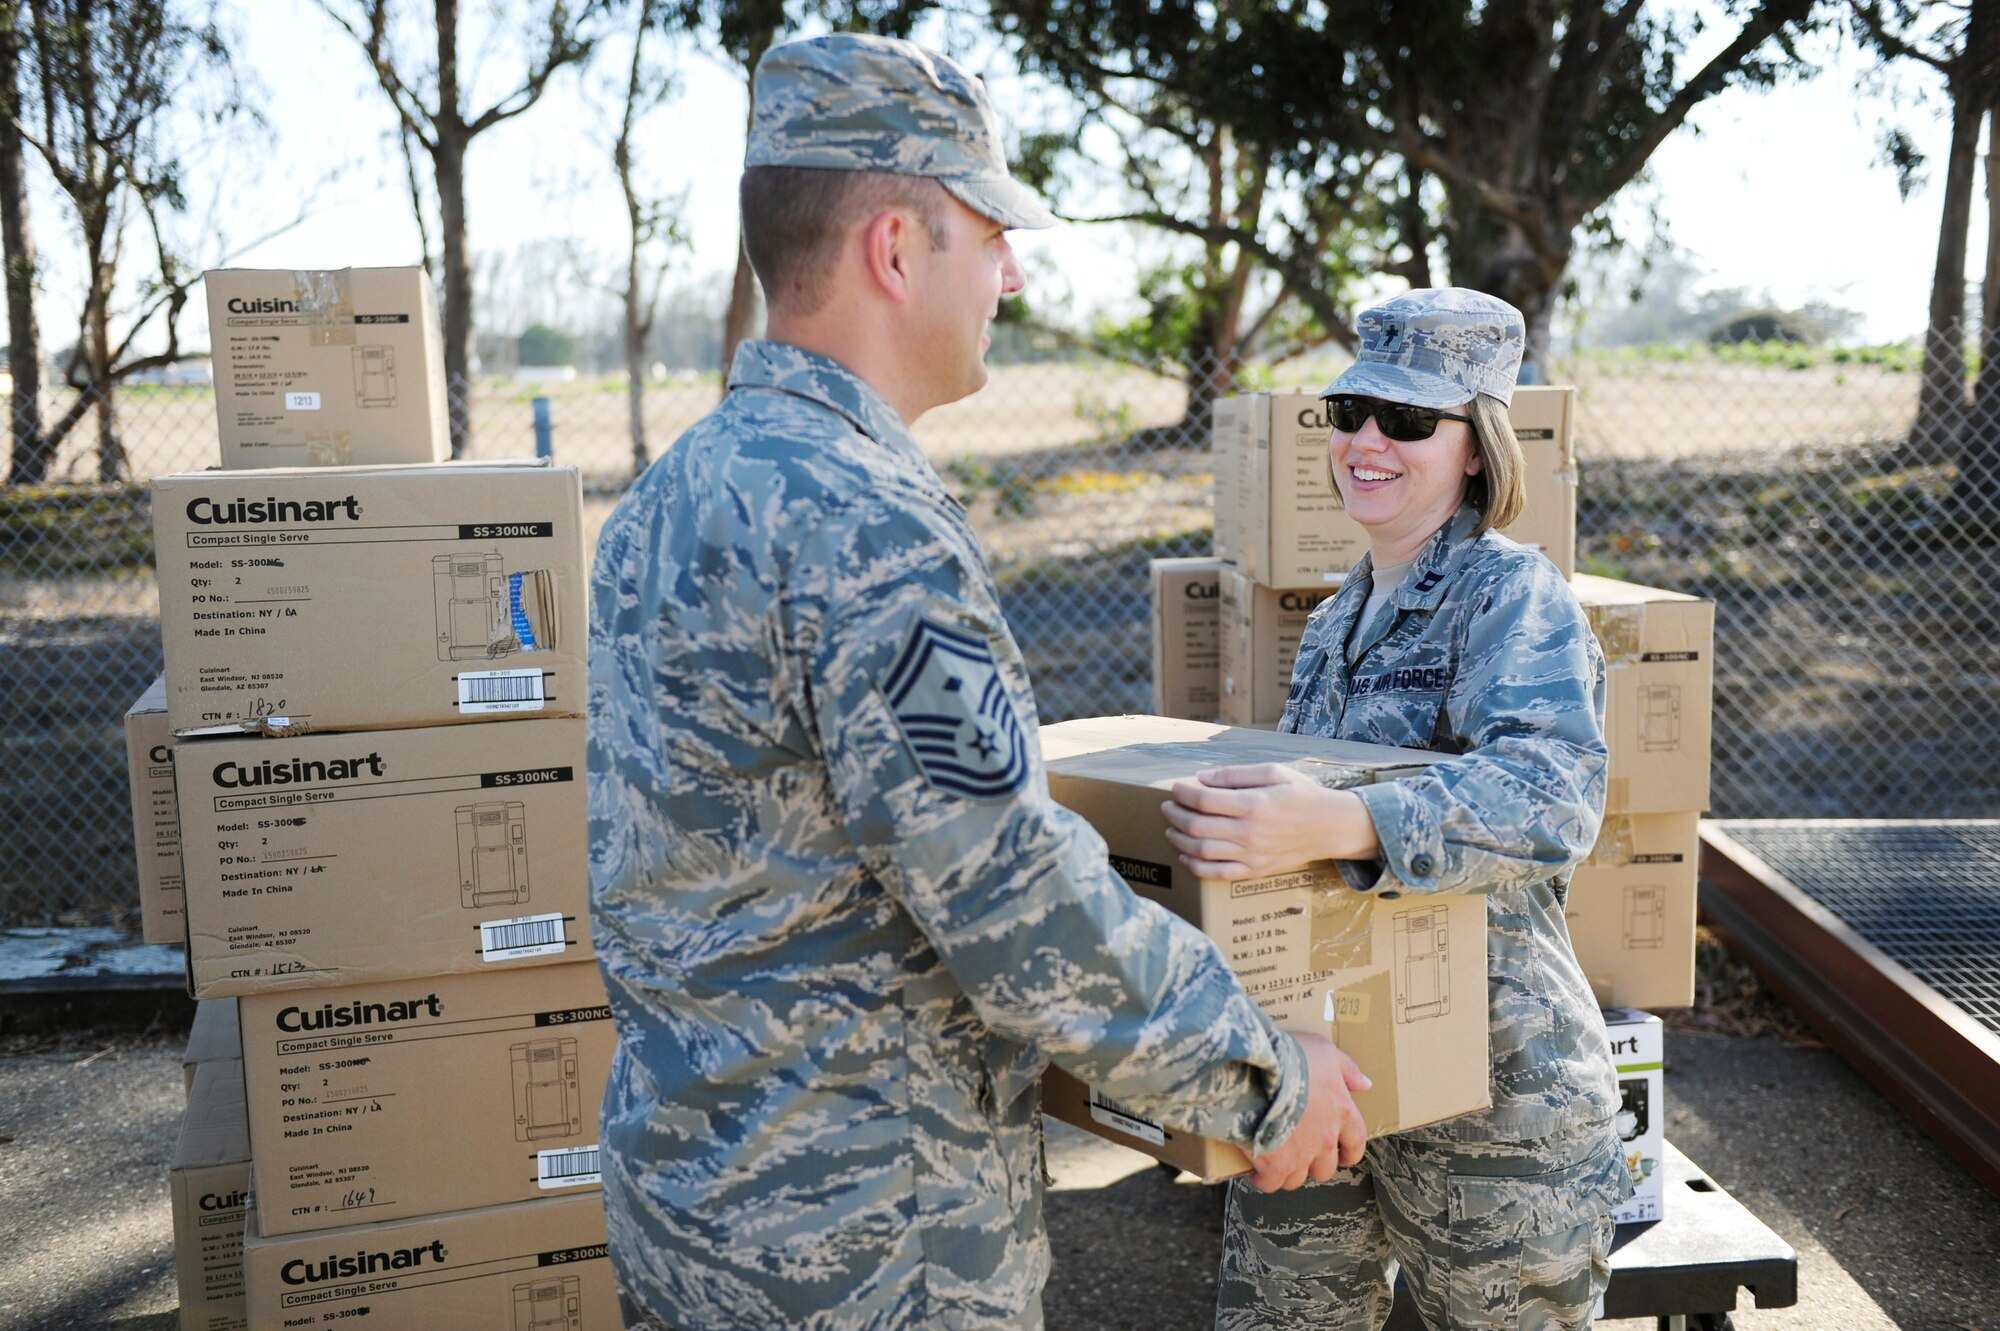 Capt. Krista Ingram, 30th Space Wing chaplain, hands a coffee maker to Senior Master Sgt. Zack Stys, 30th Civil Engineer Squadron first sergeant, during Operations Coffee Drop, Aug. 27, 2015, Vandenberg Air Force Base, Calif. The 30th SW chapel distributed 77 coffee makers to Team Vandenberg to improve morale and welfare. (U.S. Air Force photo by Staff Sgt. Jim Araos/Released)